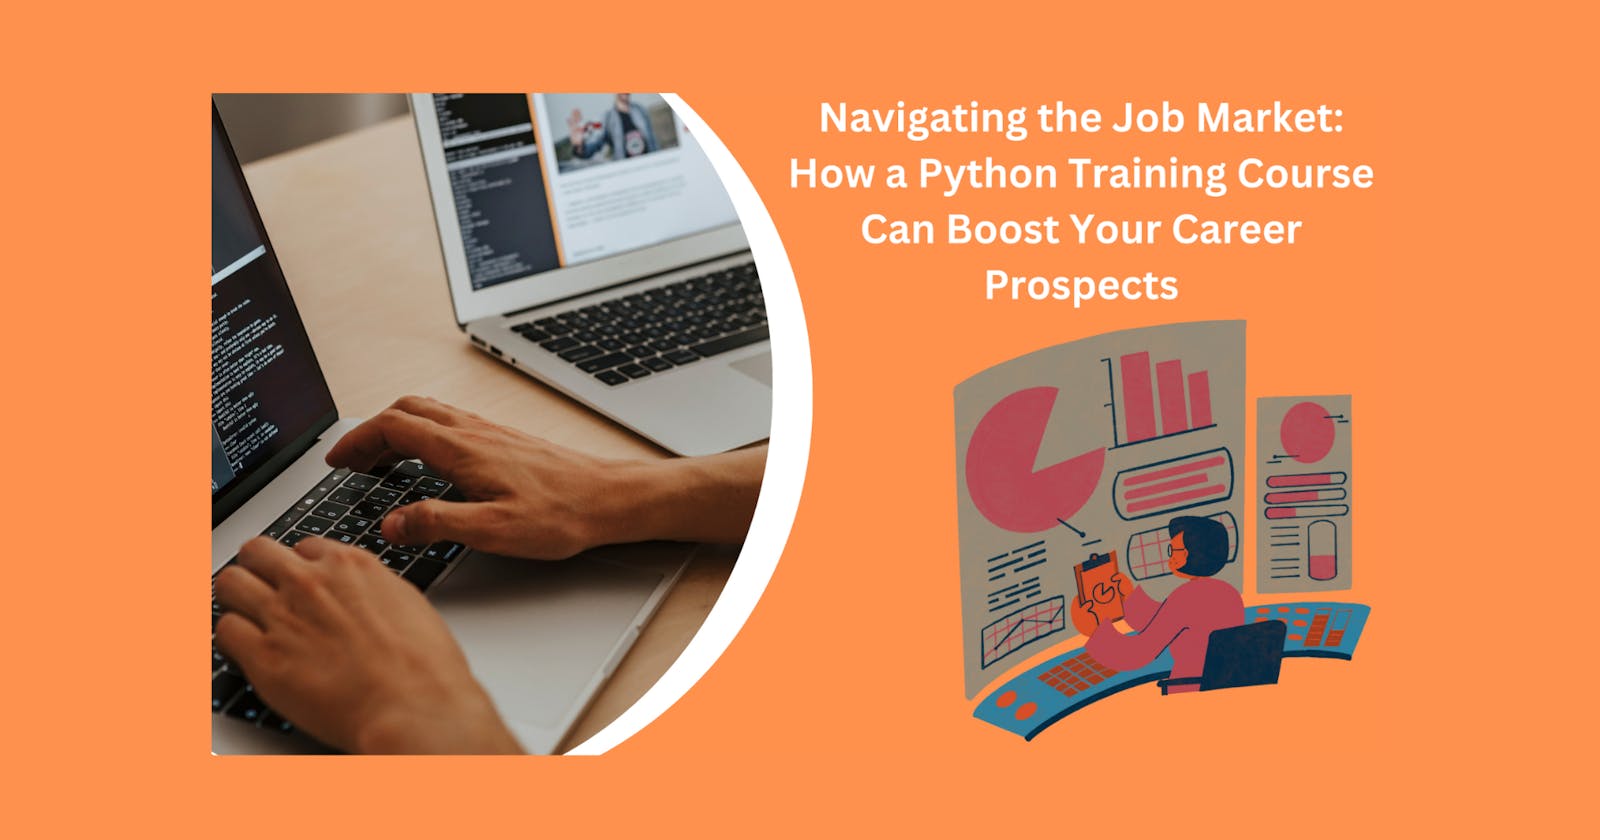 Navigating the Job Market: How a Python Training Course Can Boost Your Career Prospects